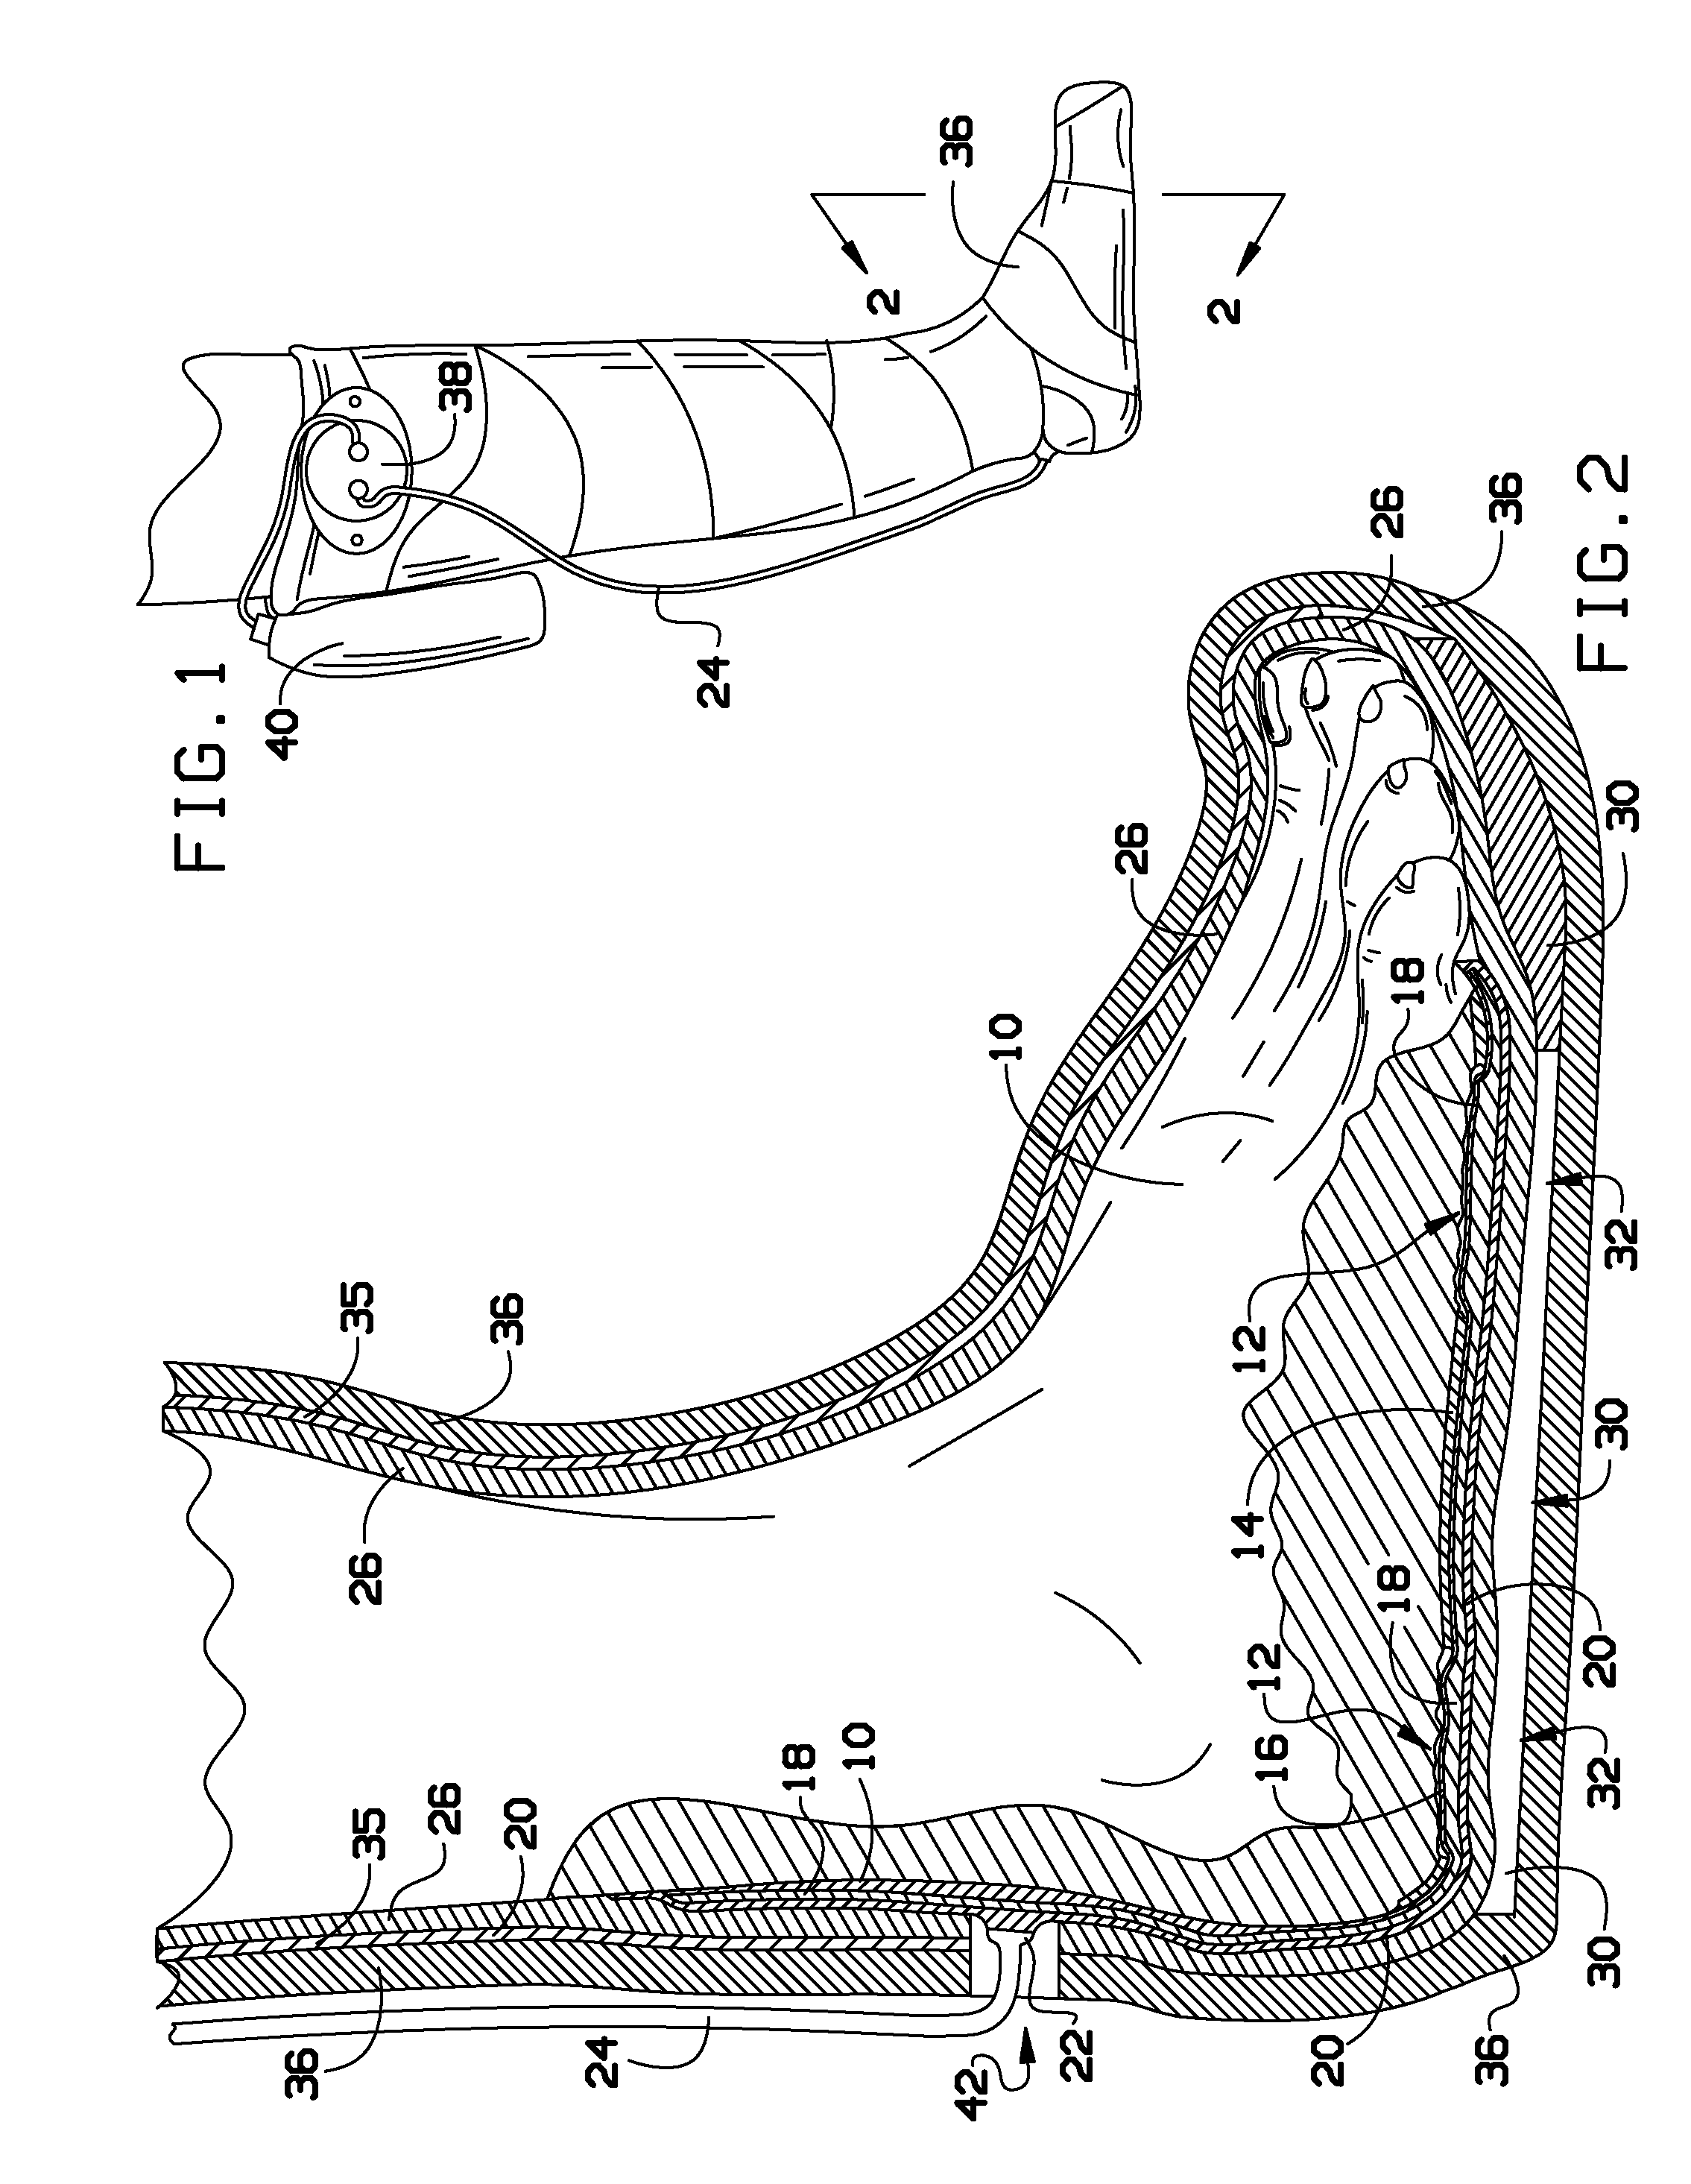 Vacuum cast ("vac-cast") and methods for treatment of plantar wounds